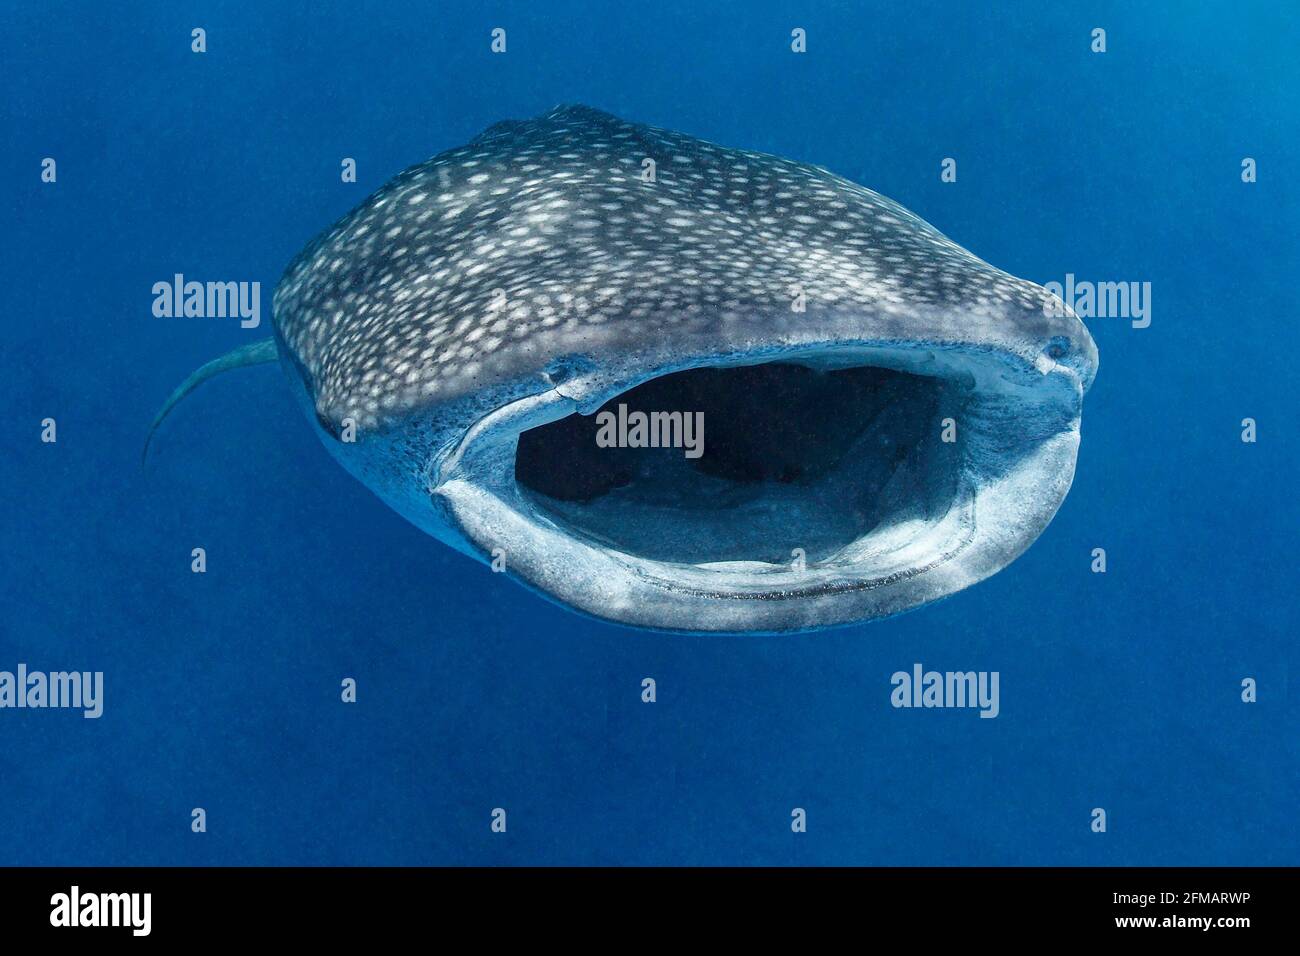 The whale shark (Rhincodon typus) is the largest fish in the world's  oceans. It is the only species in the genus Rhincodon. Its maximum size is  18 meters and its weight is